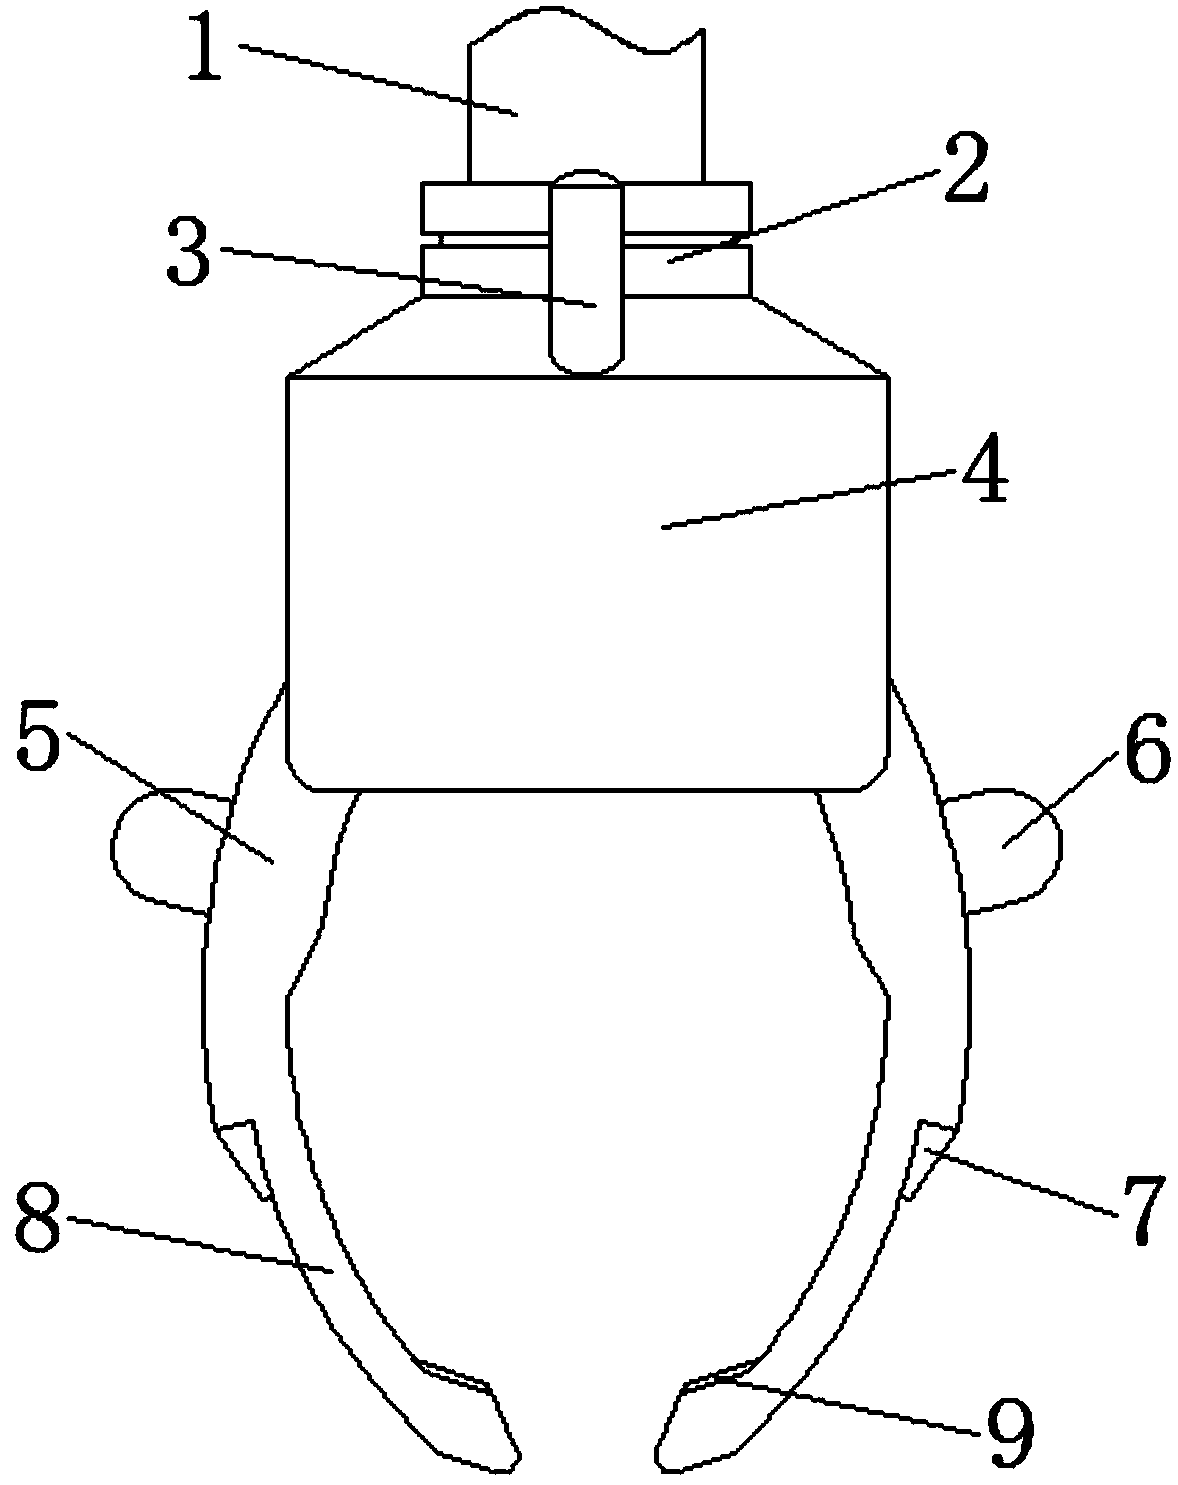 Mechanical clamping claw capable of extracting and preventing objects different in size from falling